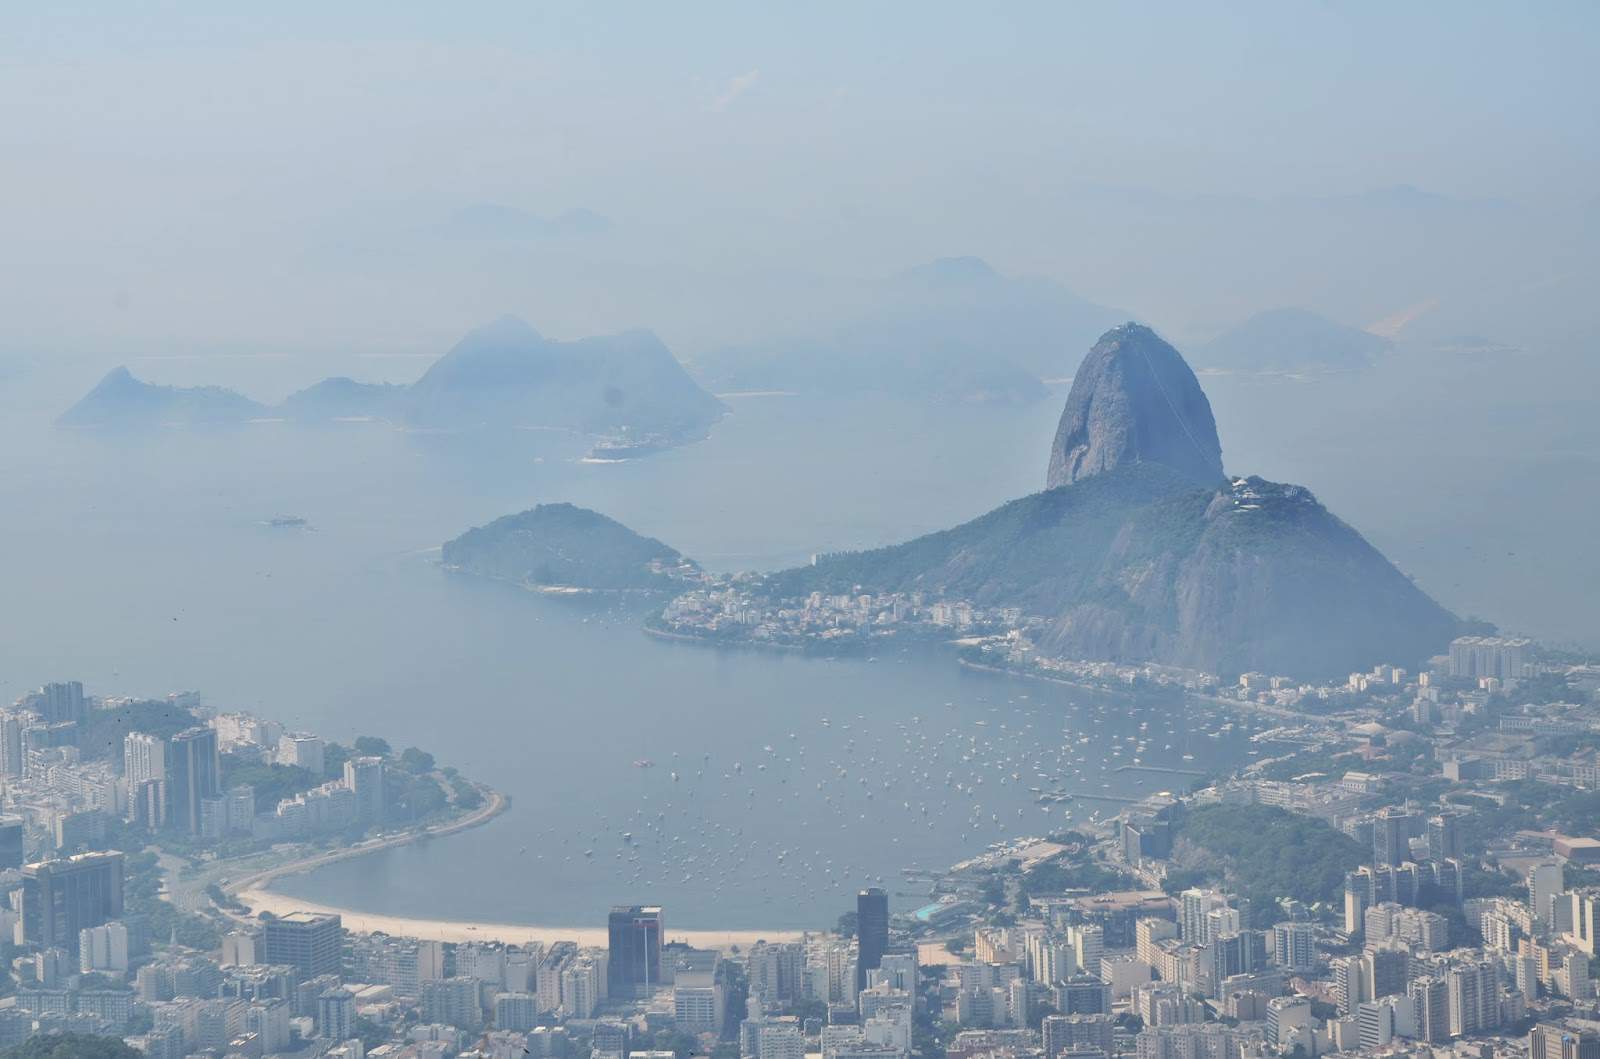 Sugarloaf Mountain from Corcovado in the Tijuca Forest National Park, Rio de Janeiro, Brazil